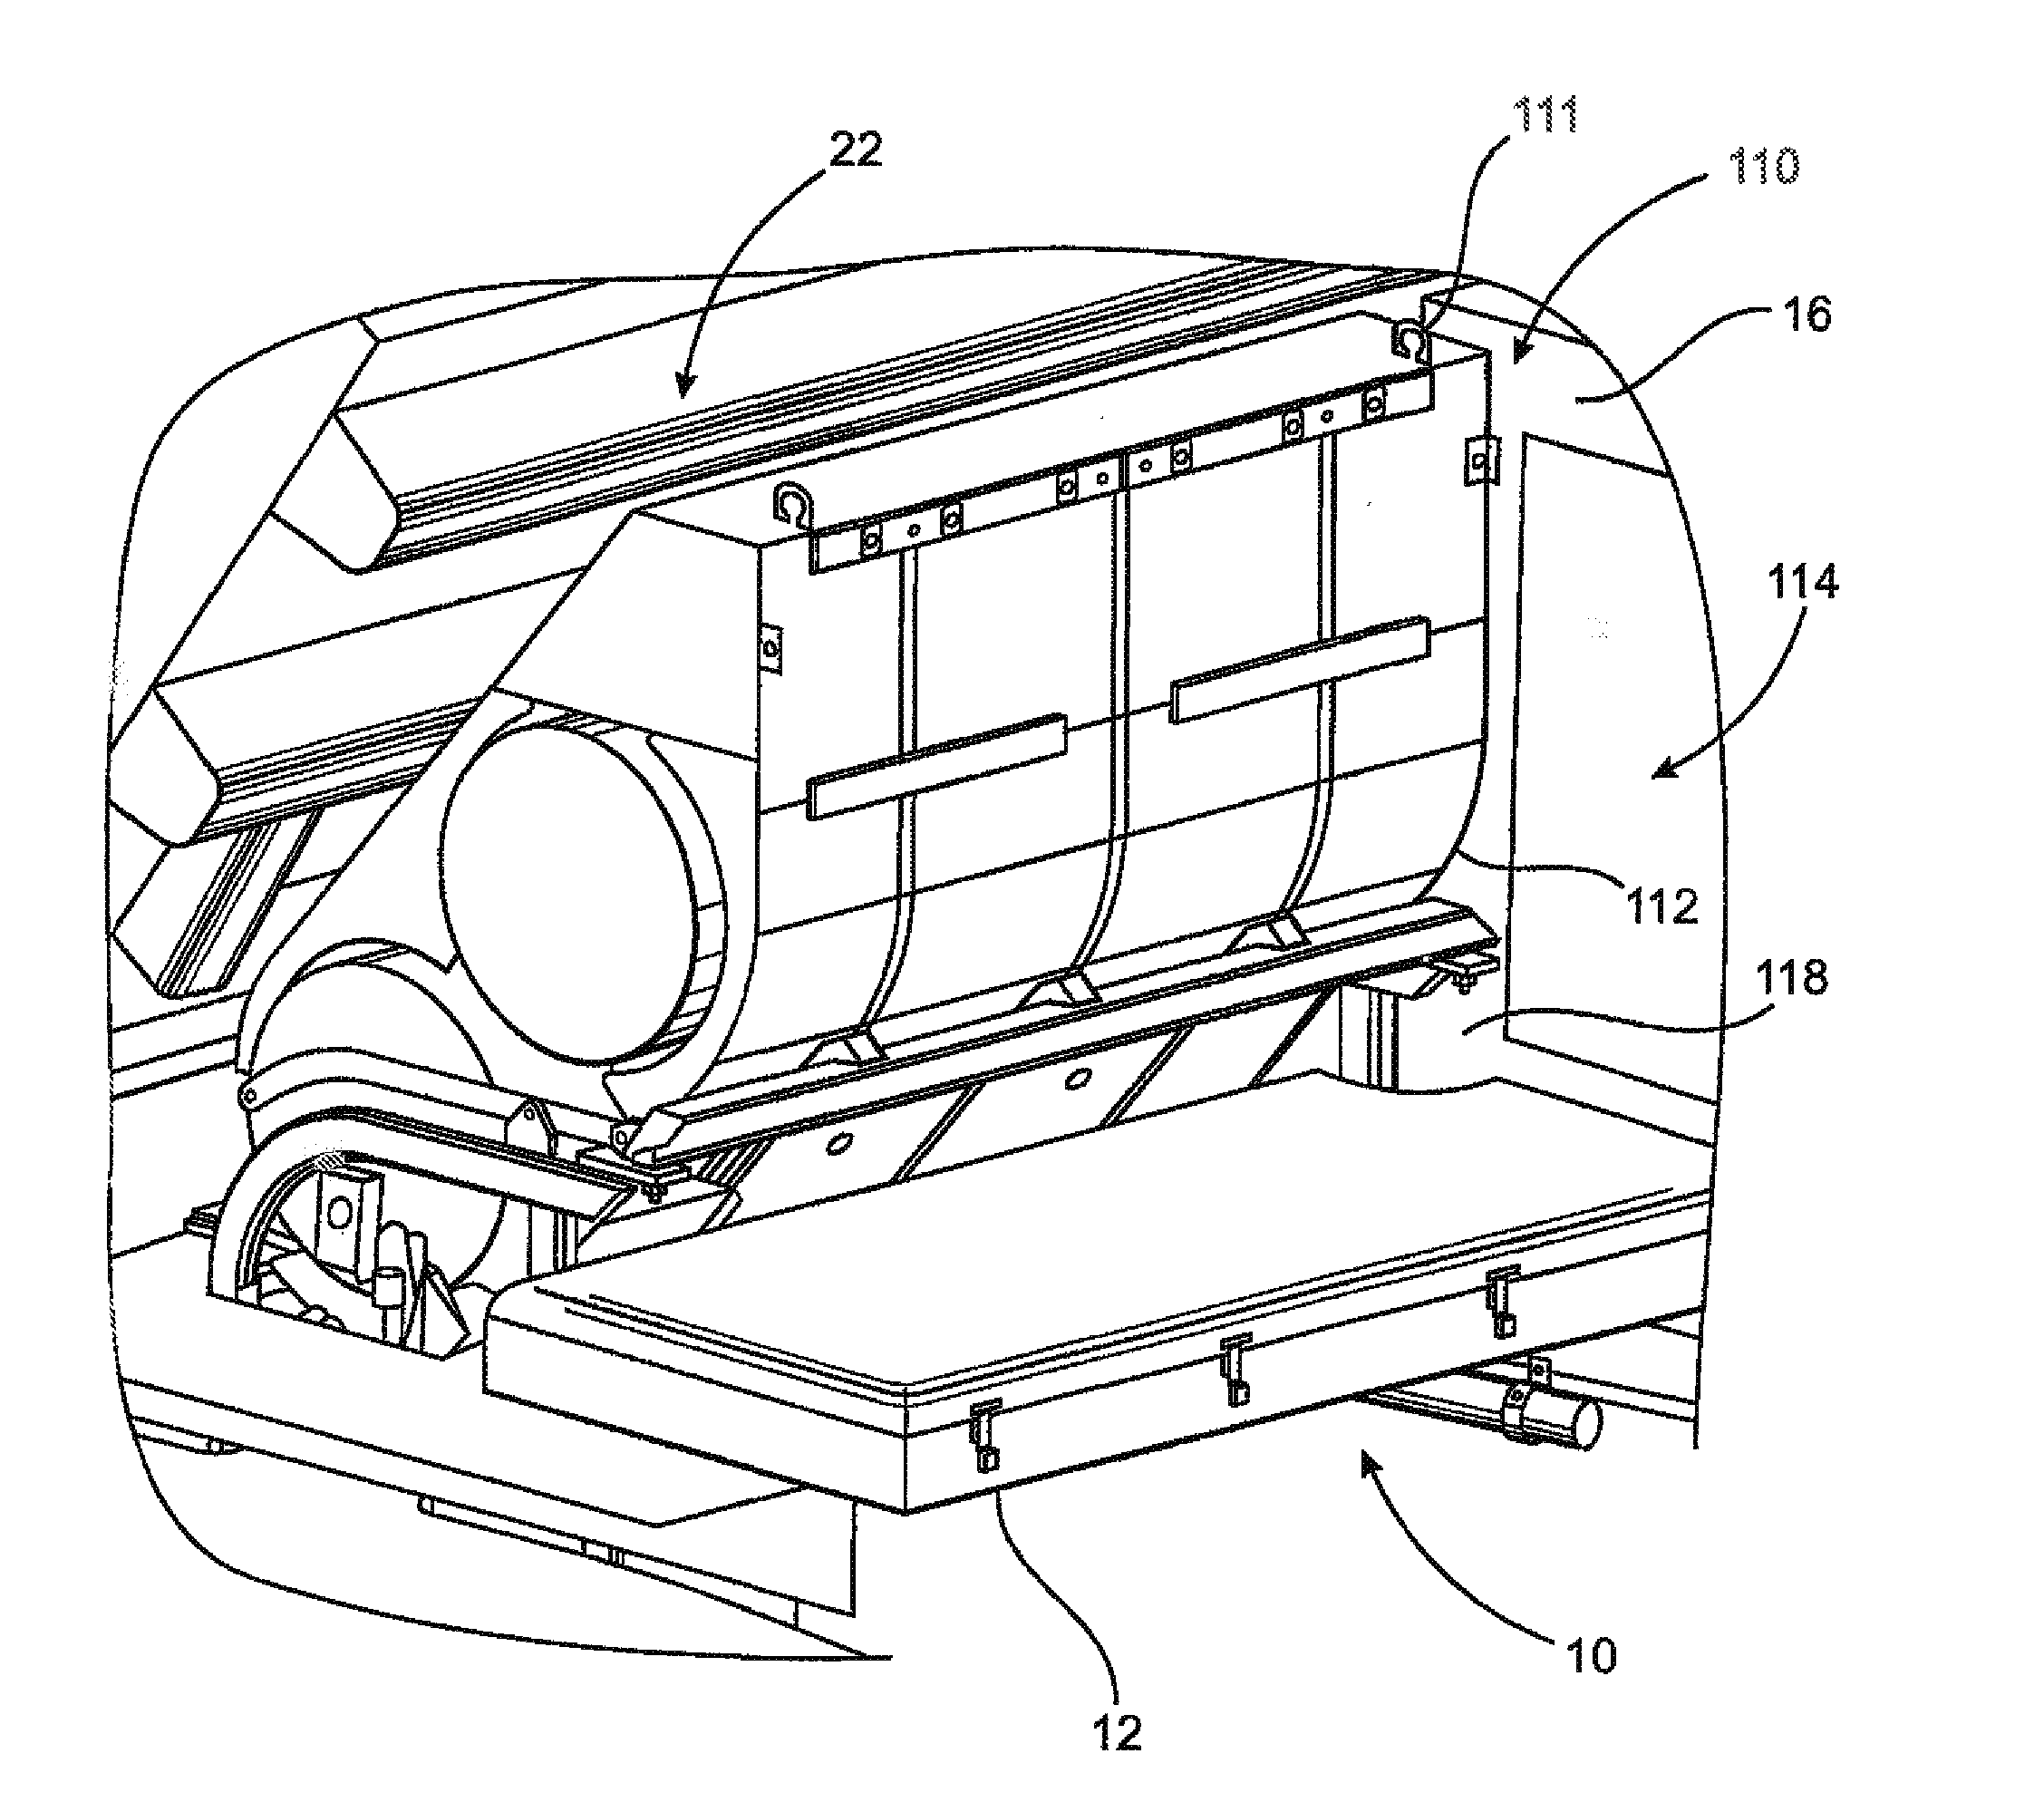 Modification of an industrial vehicle to include a containment area and mounting assembly for an alternate fuel